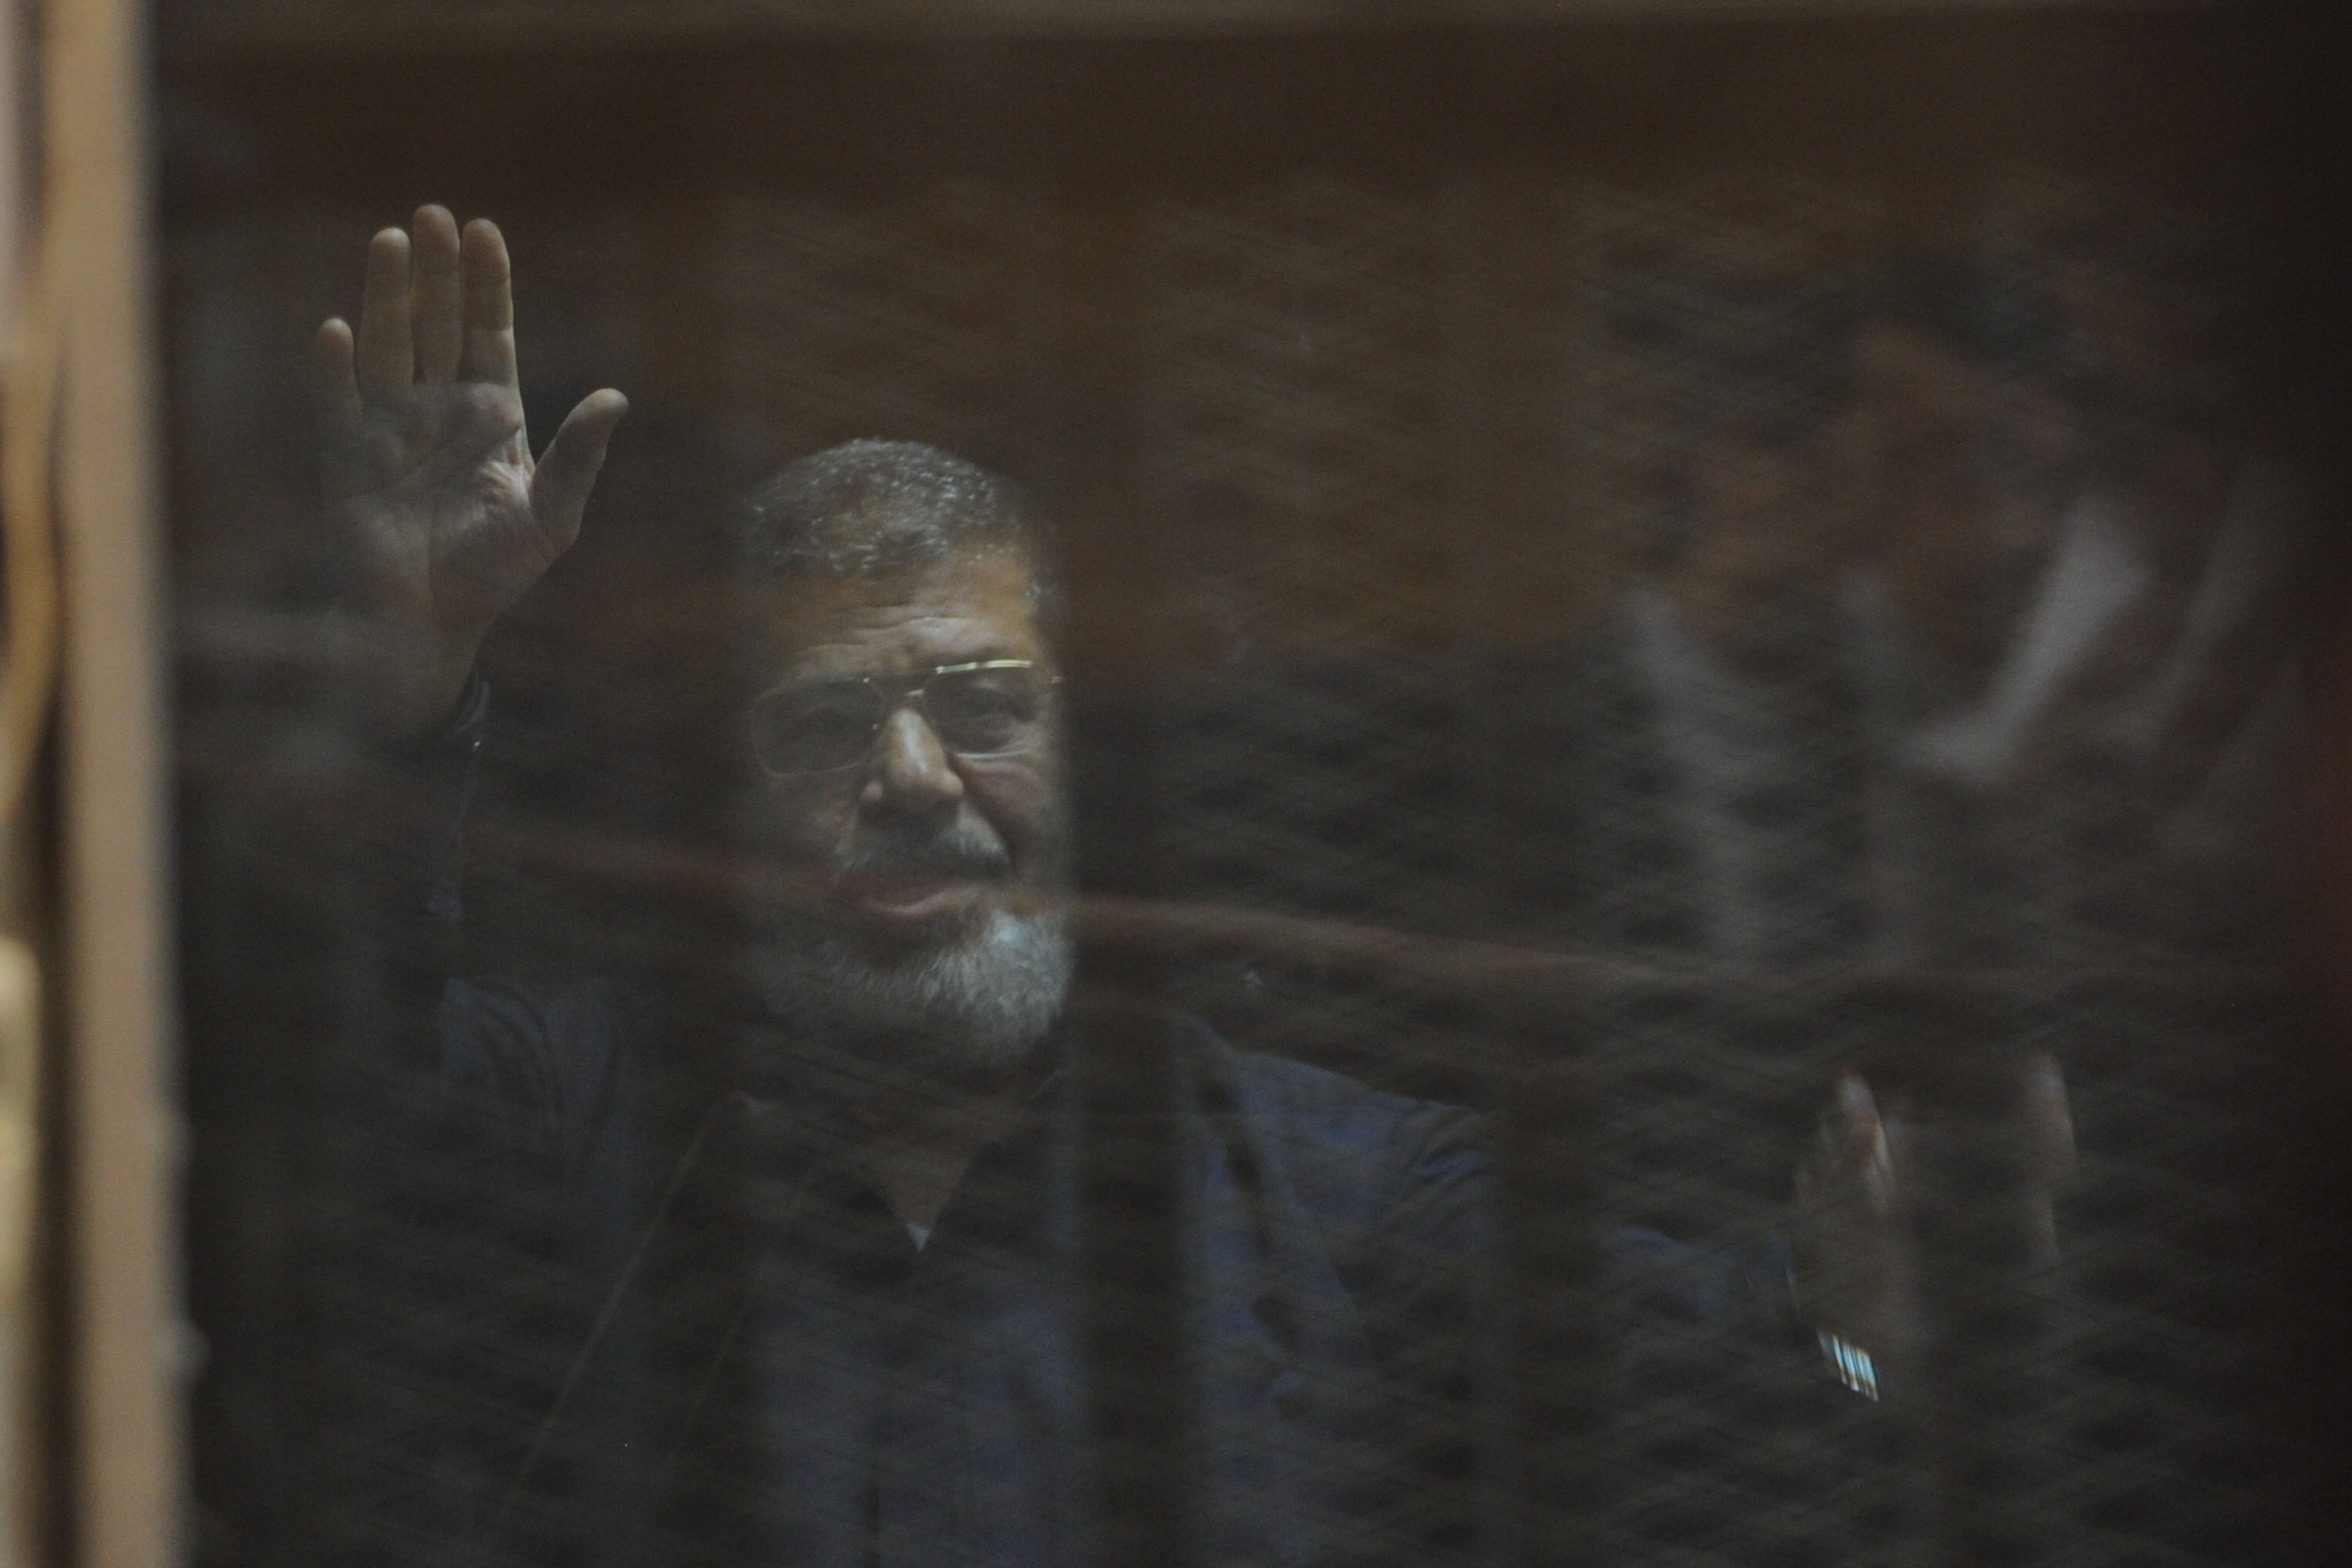 Official condemnations of new death sentences for Brotherhood leaders